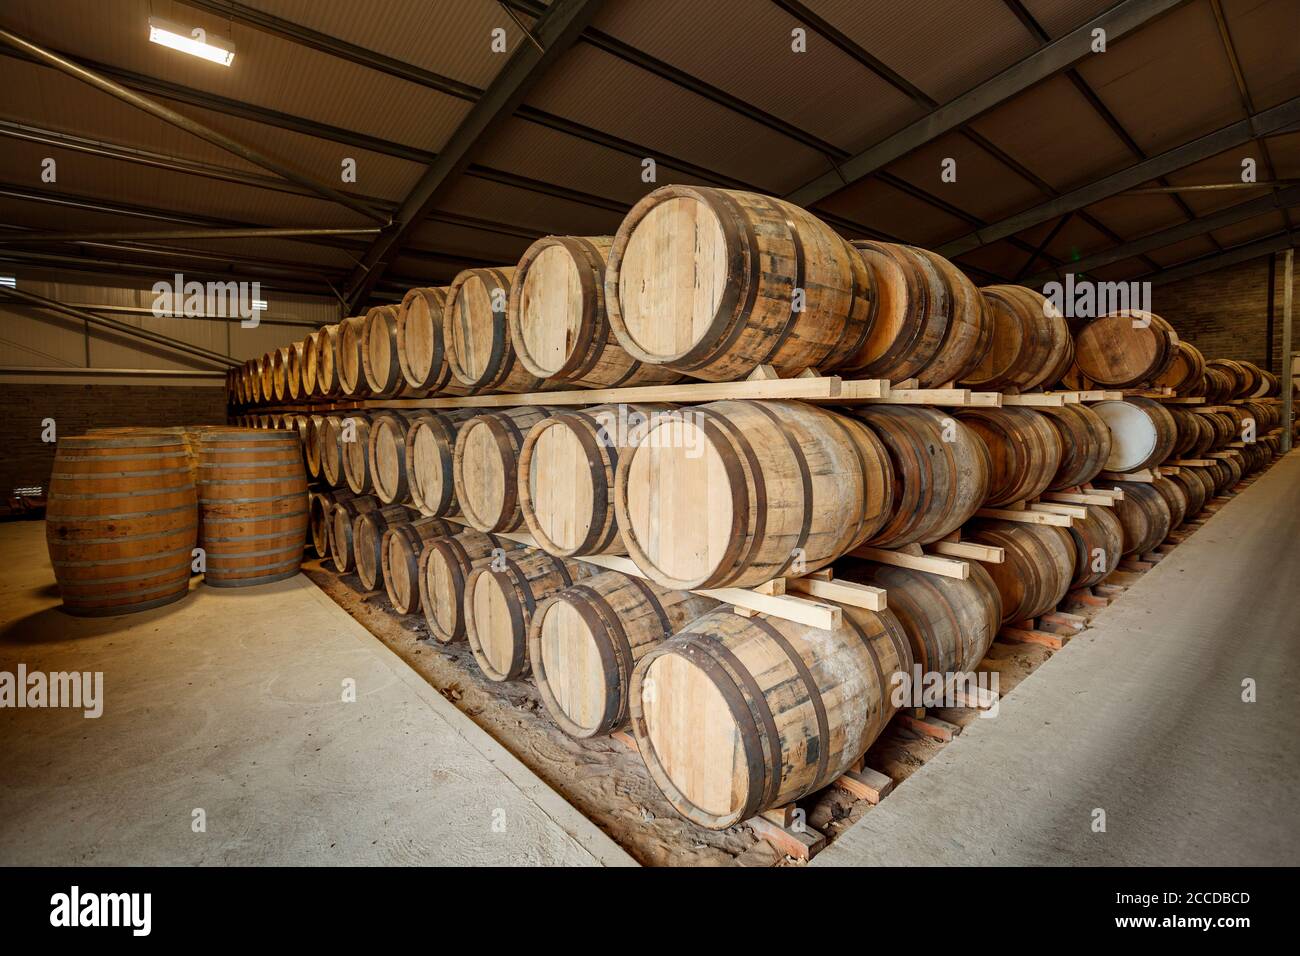 Rows of traditional full whisky barrels, set down to mature, in a large warehouse facility, with acute perspective Stock Photo